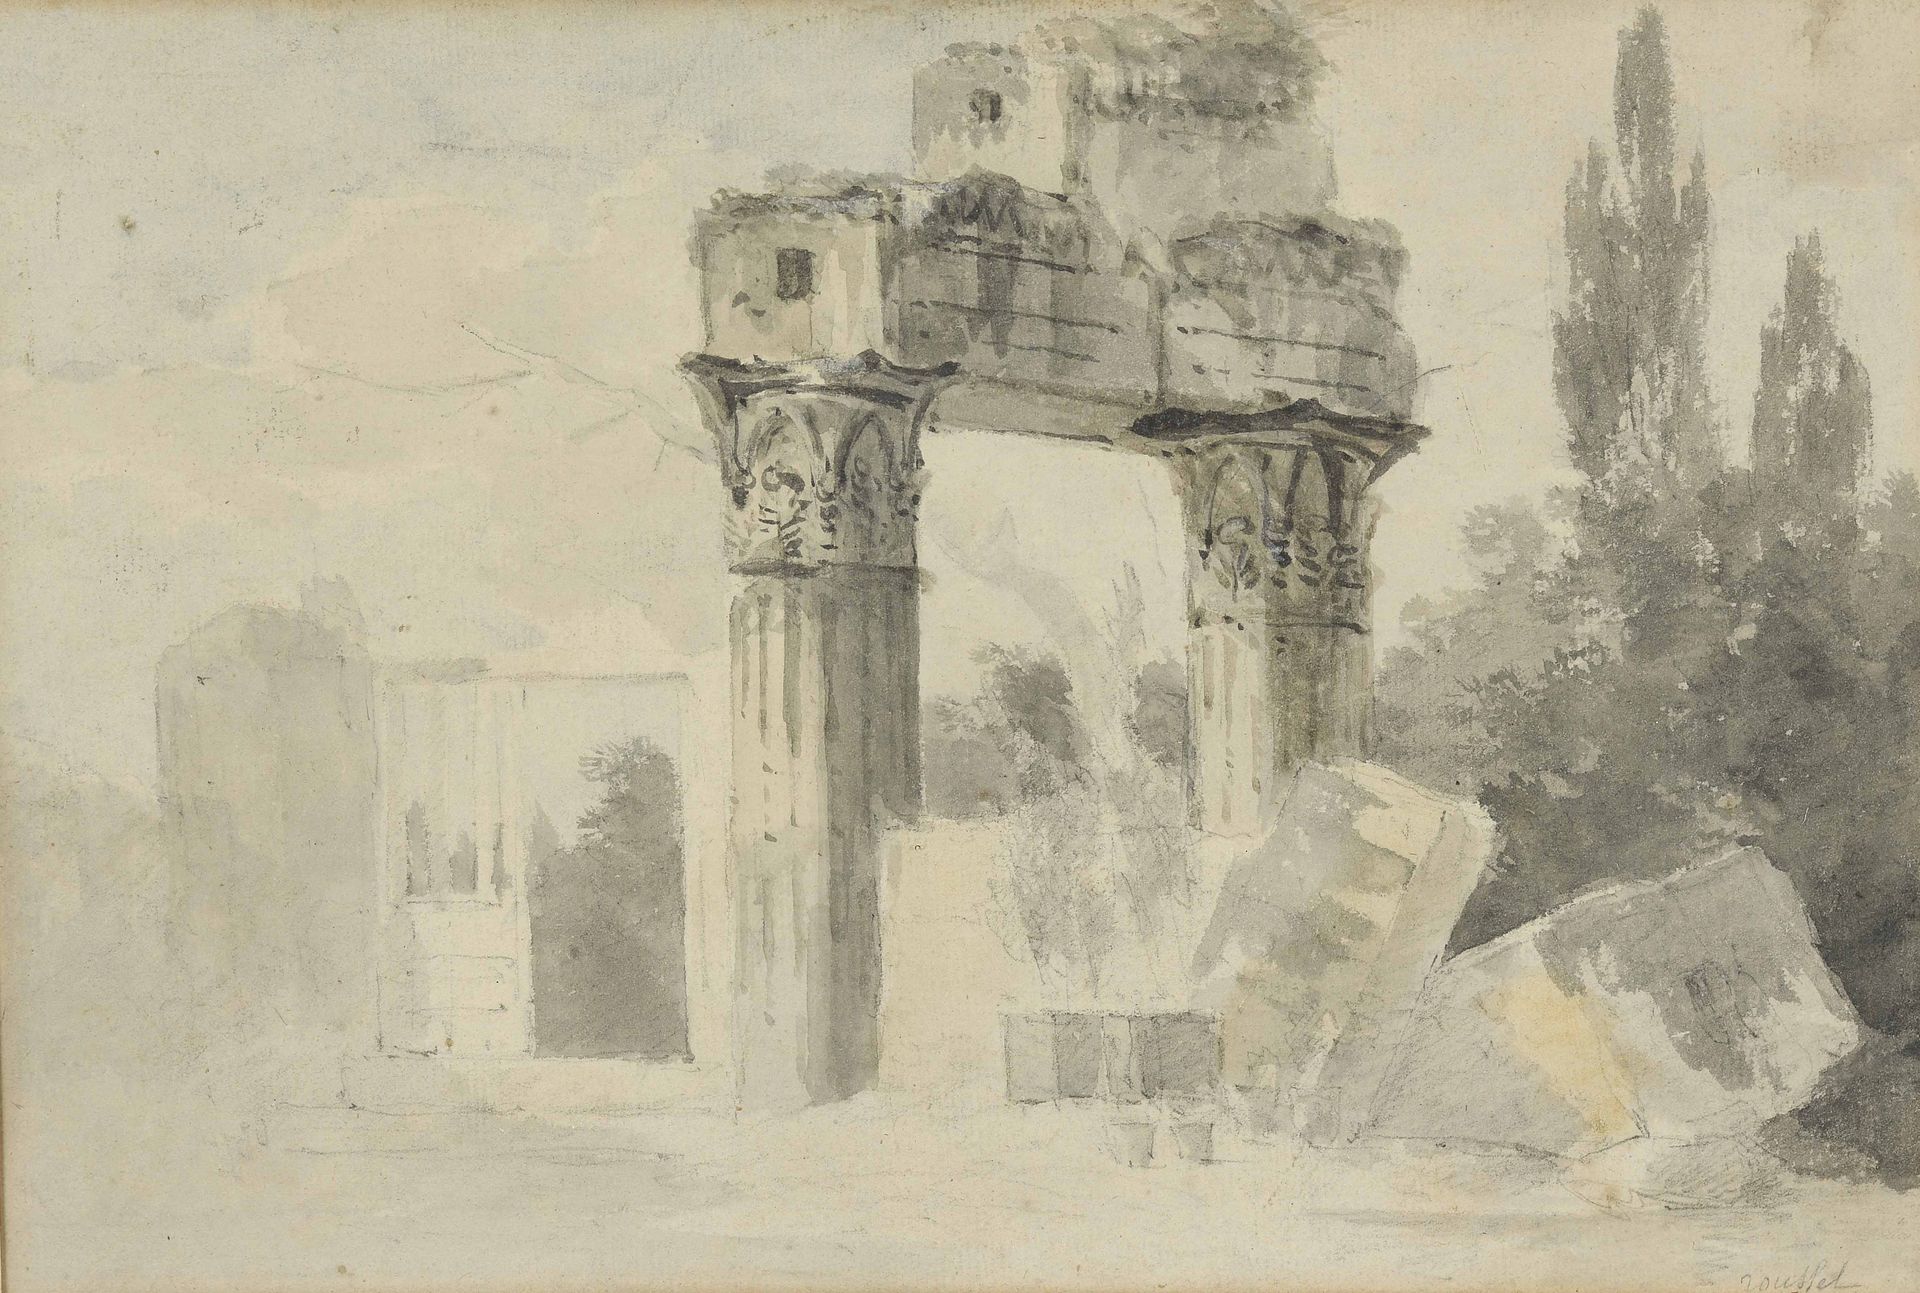 Null ROUSSEL
Ruins
Wash drawing, signed lower right.
18,3 x 26,8 cm